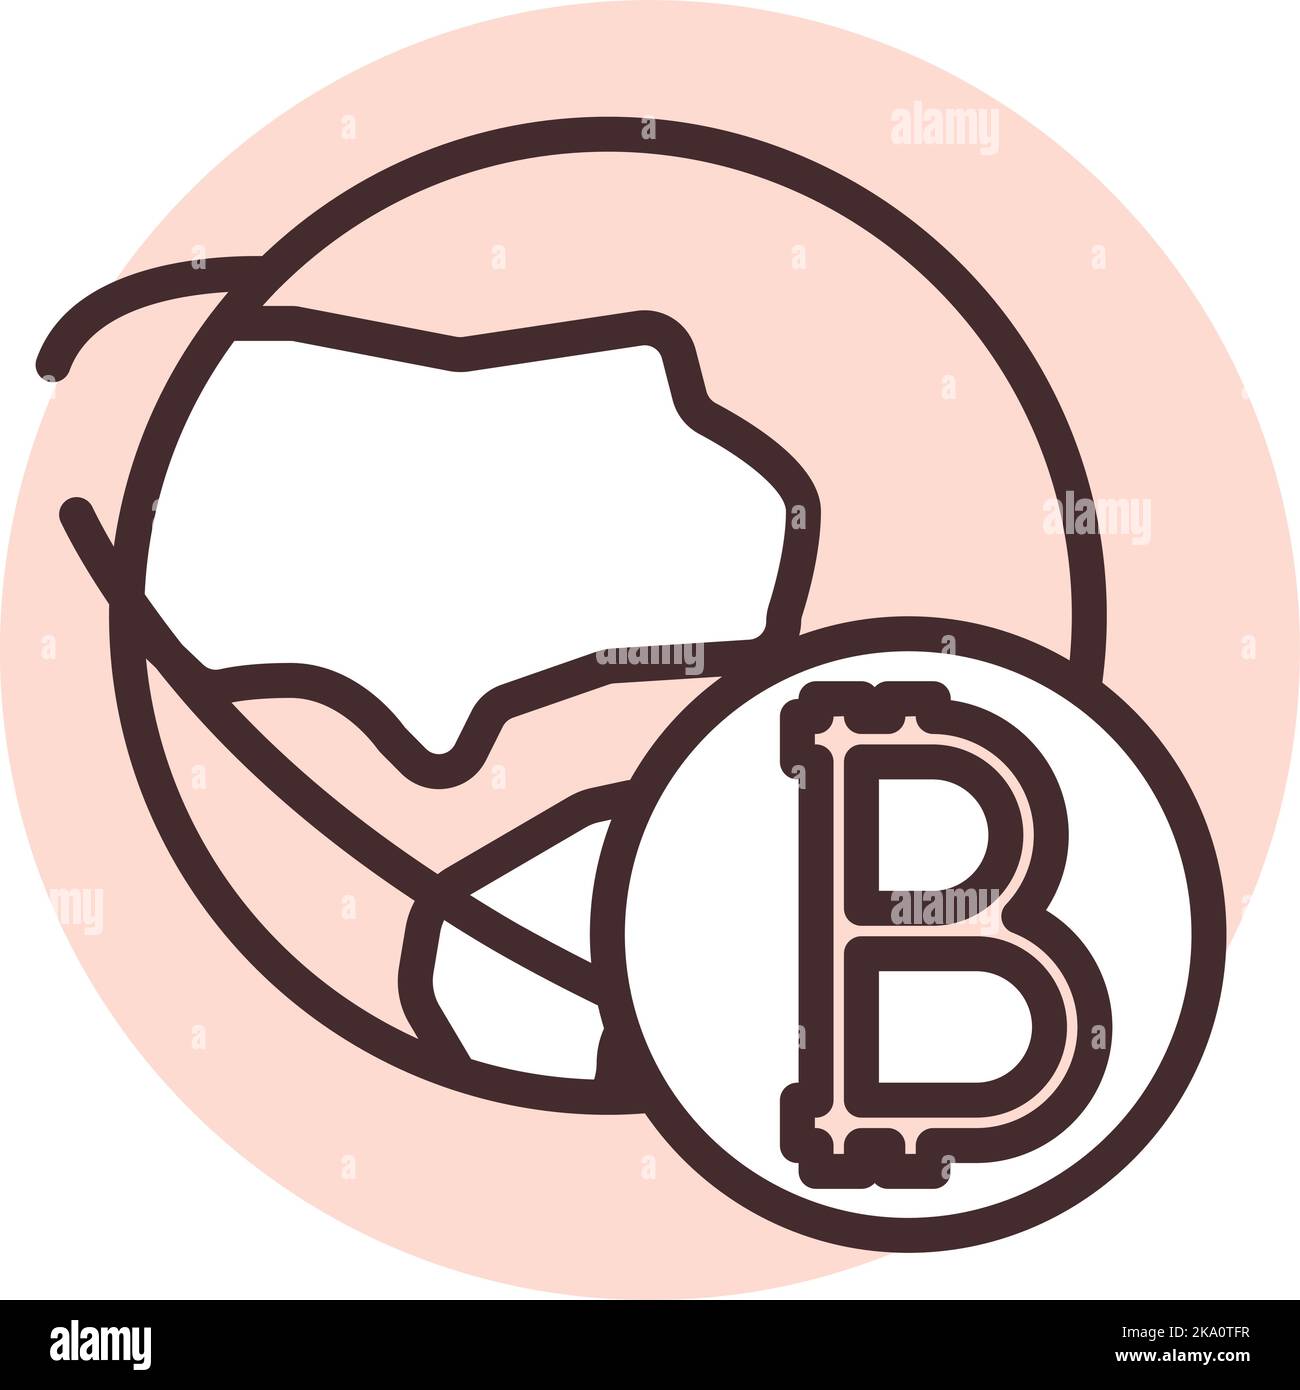 Blockchain global currency, illustration or icon, vector on white background. Stock Vector